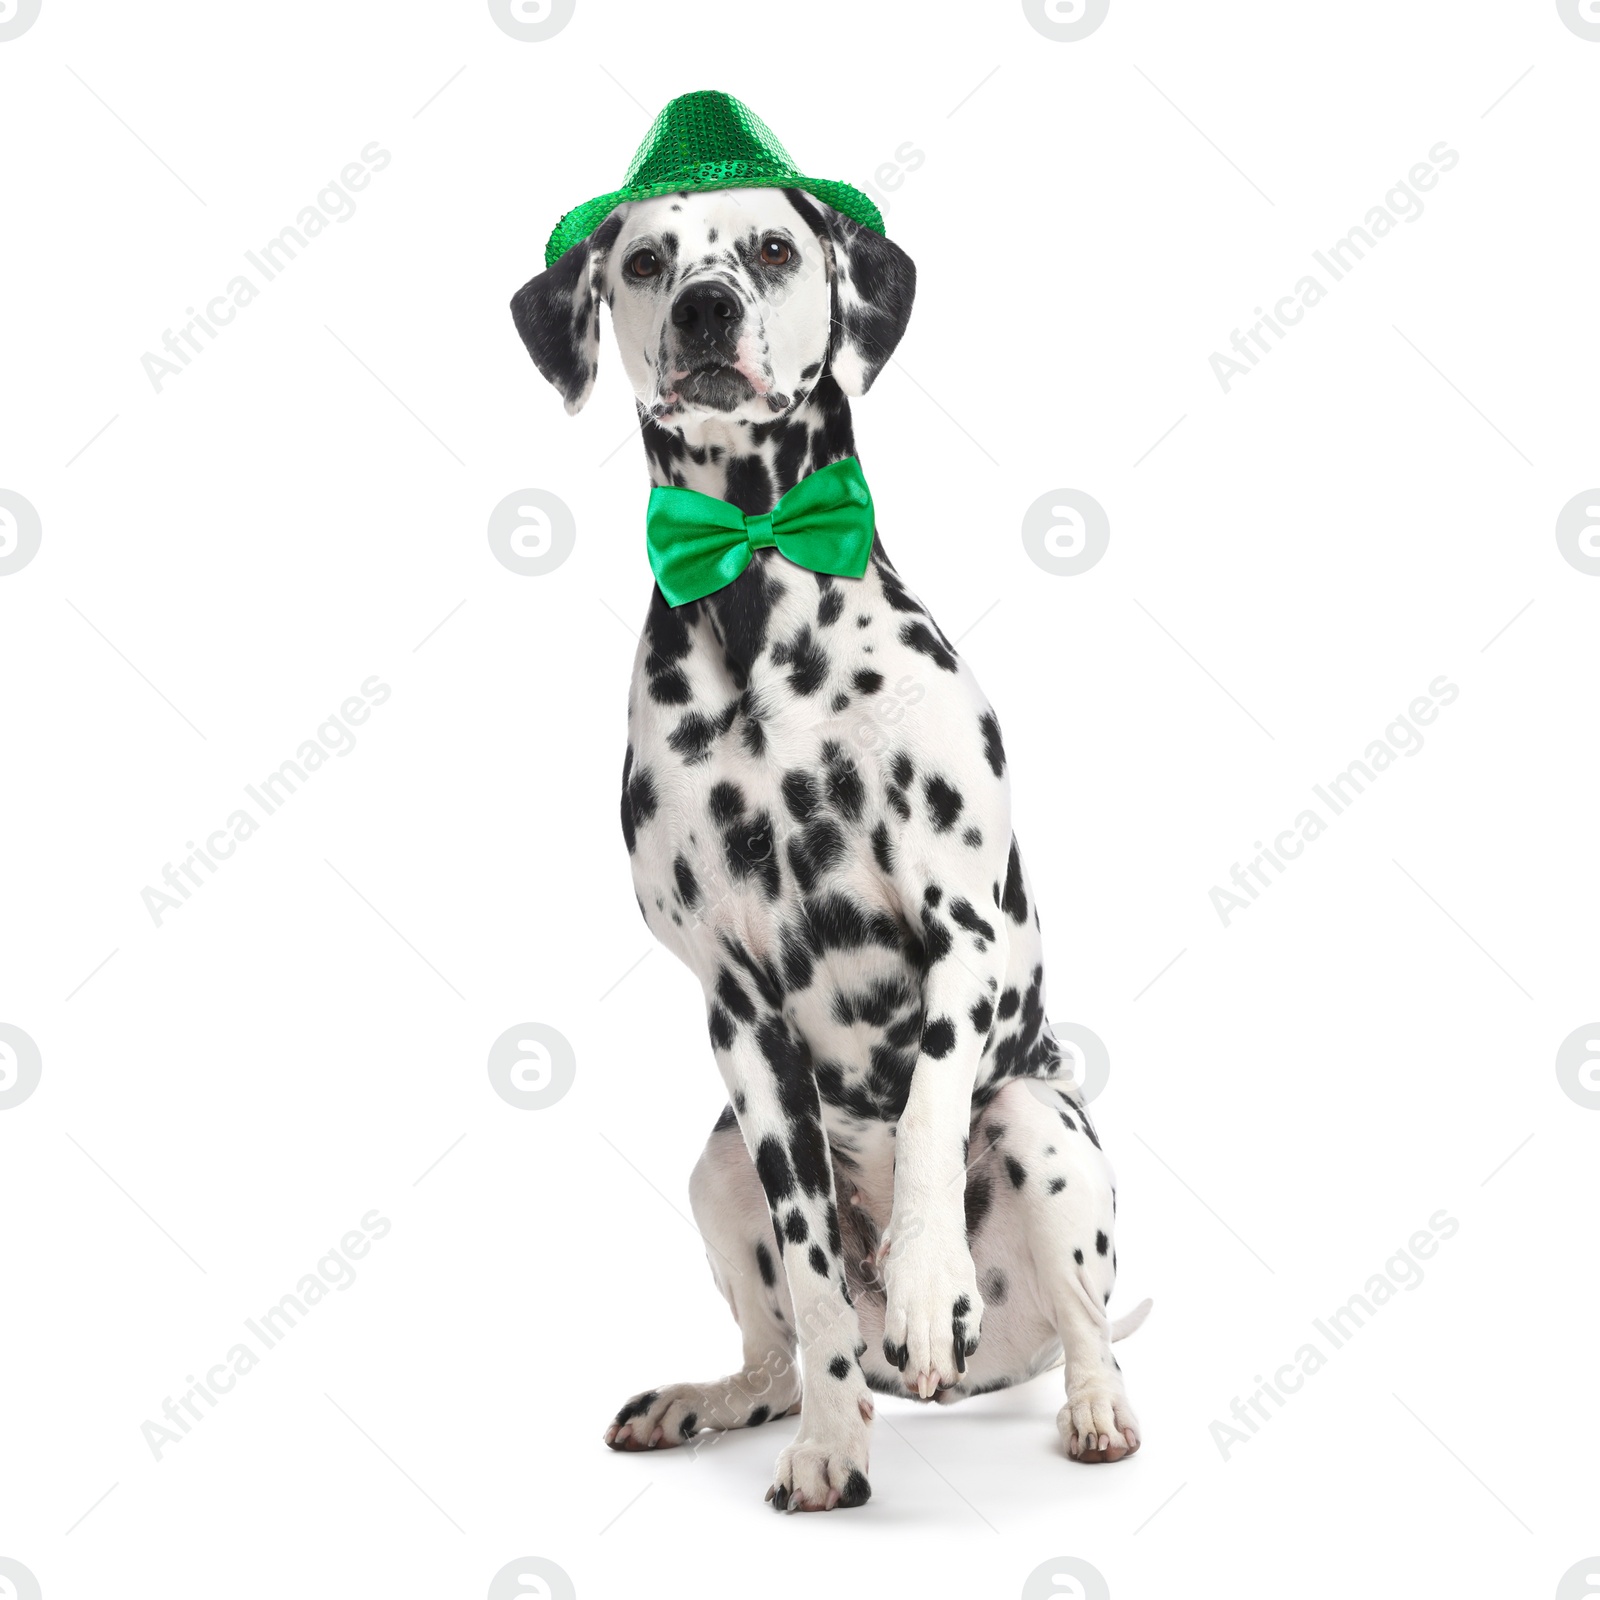 Image of St. Patrick's day celebration. Cute Dalmatian dog with green hat and bow tie isolated on white